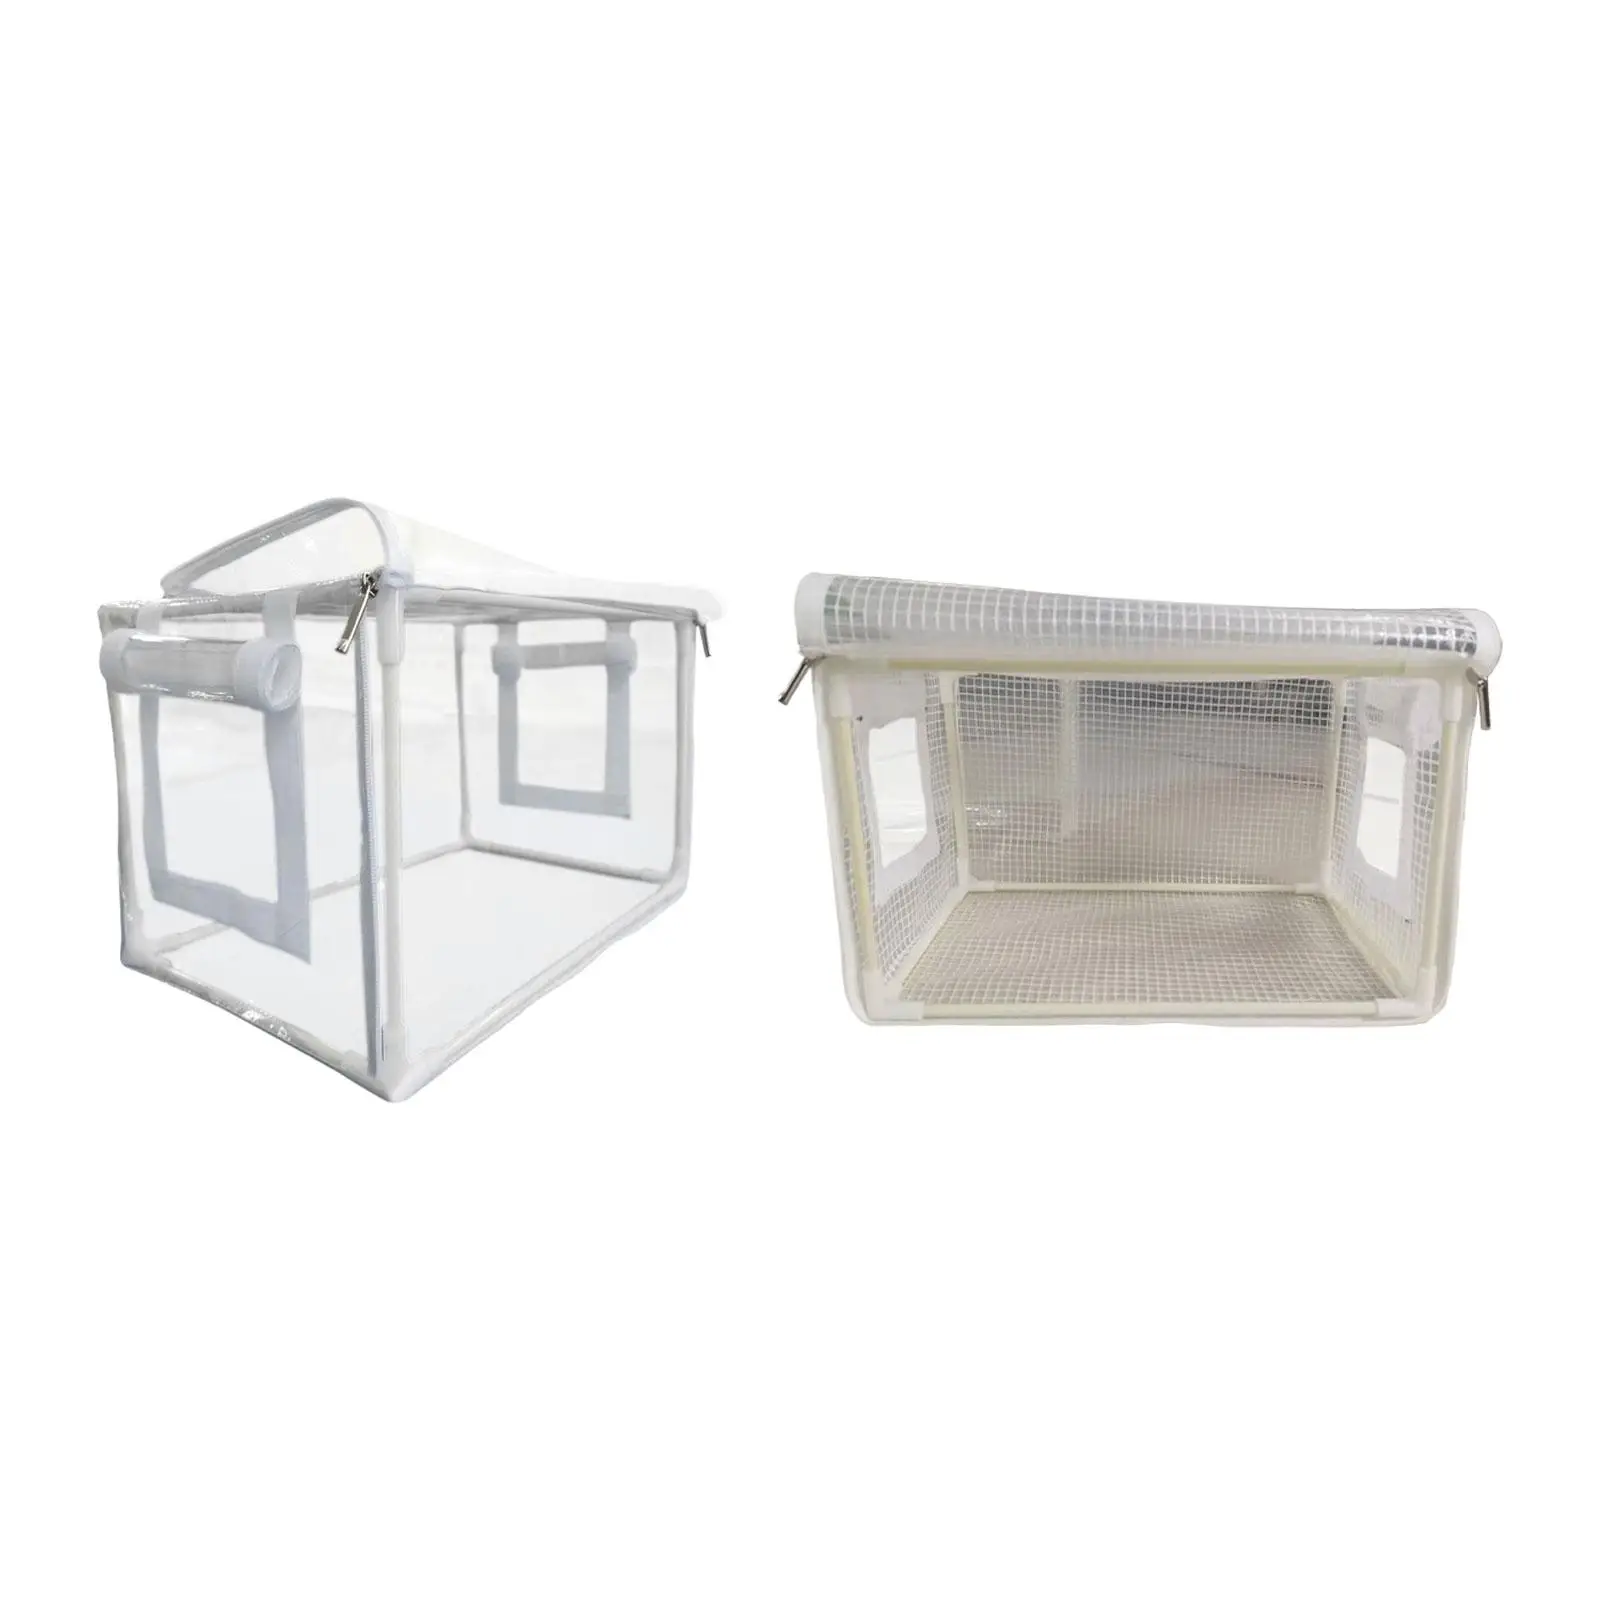 Still Air Box PVC with Sturdy Frame for Cold Frost Protector Yard Waterproof Planters Box Greenhouse Reusable Garden Greenhouse